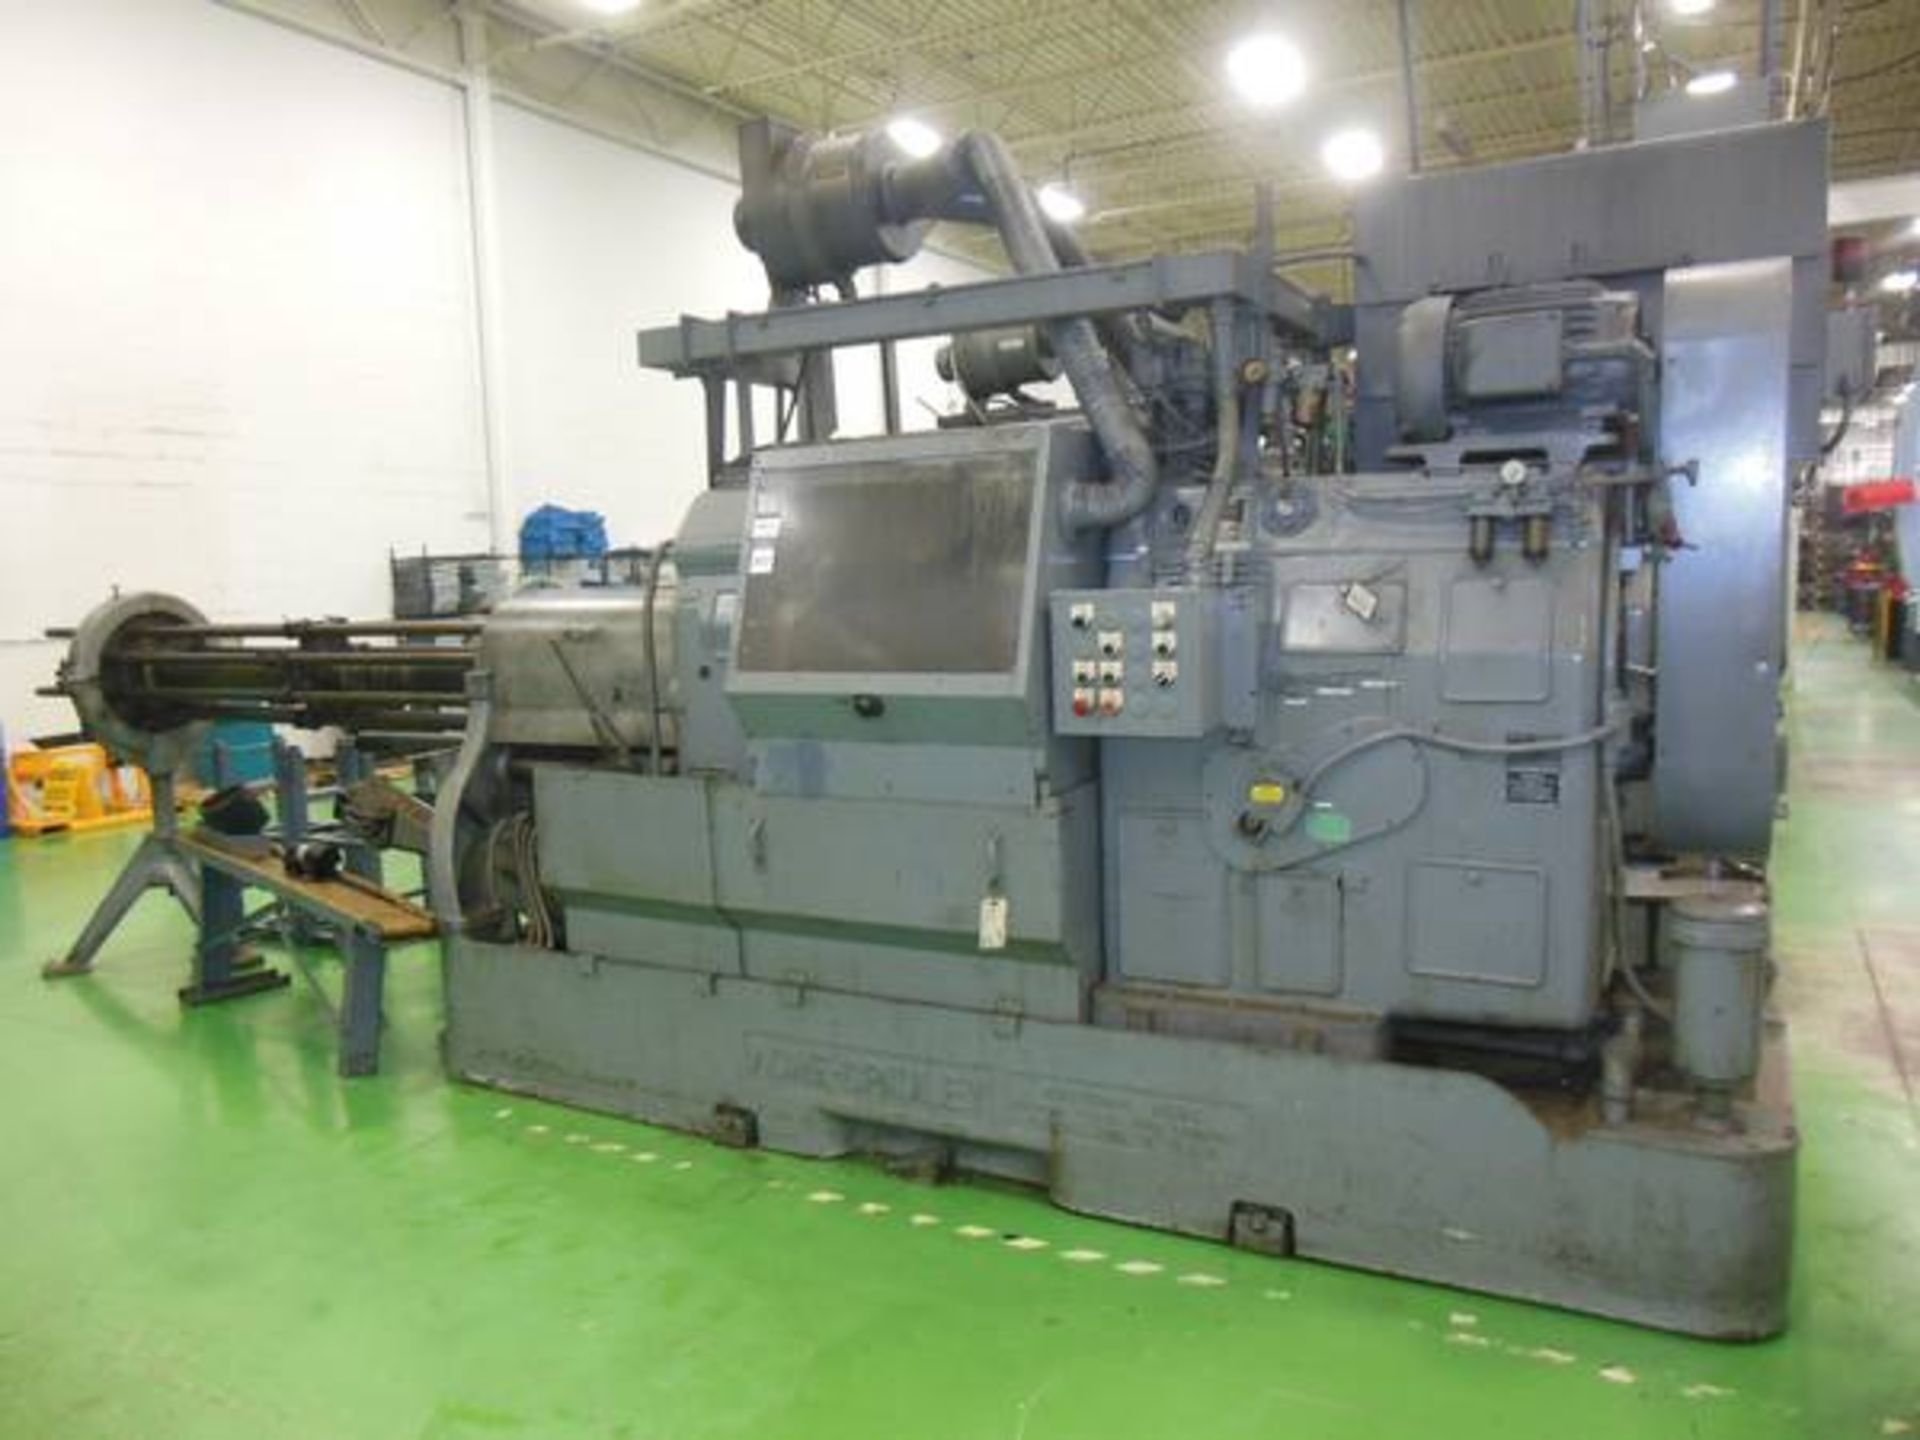 Acme Gridley Model RBC-8 1-1/4" Automatic Screw Machine; Serial Number: AM-40842; with 8-Spindles,